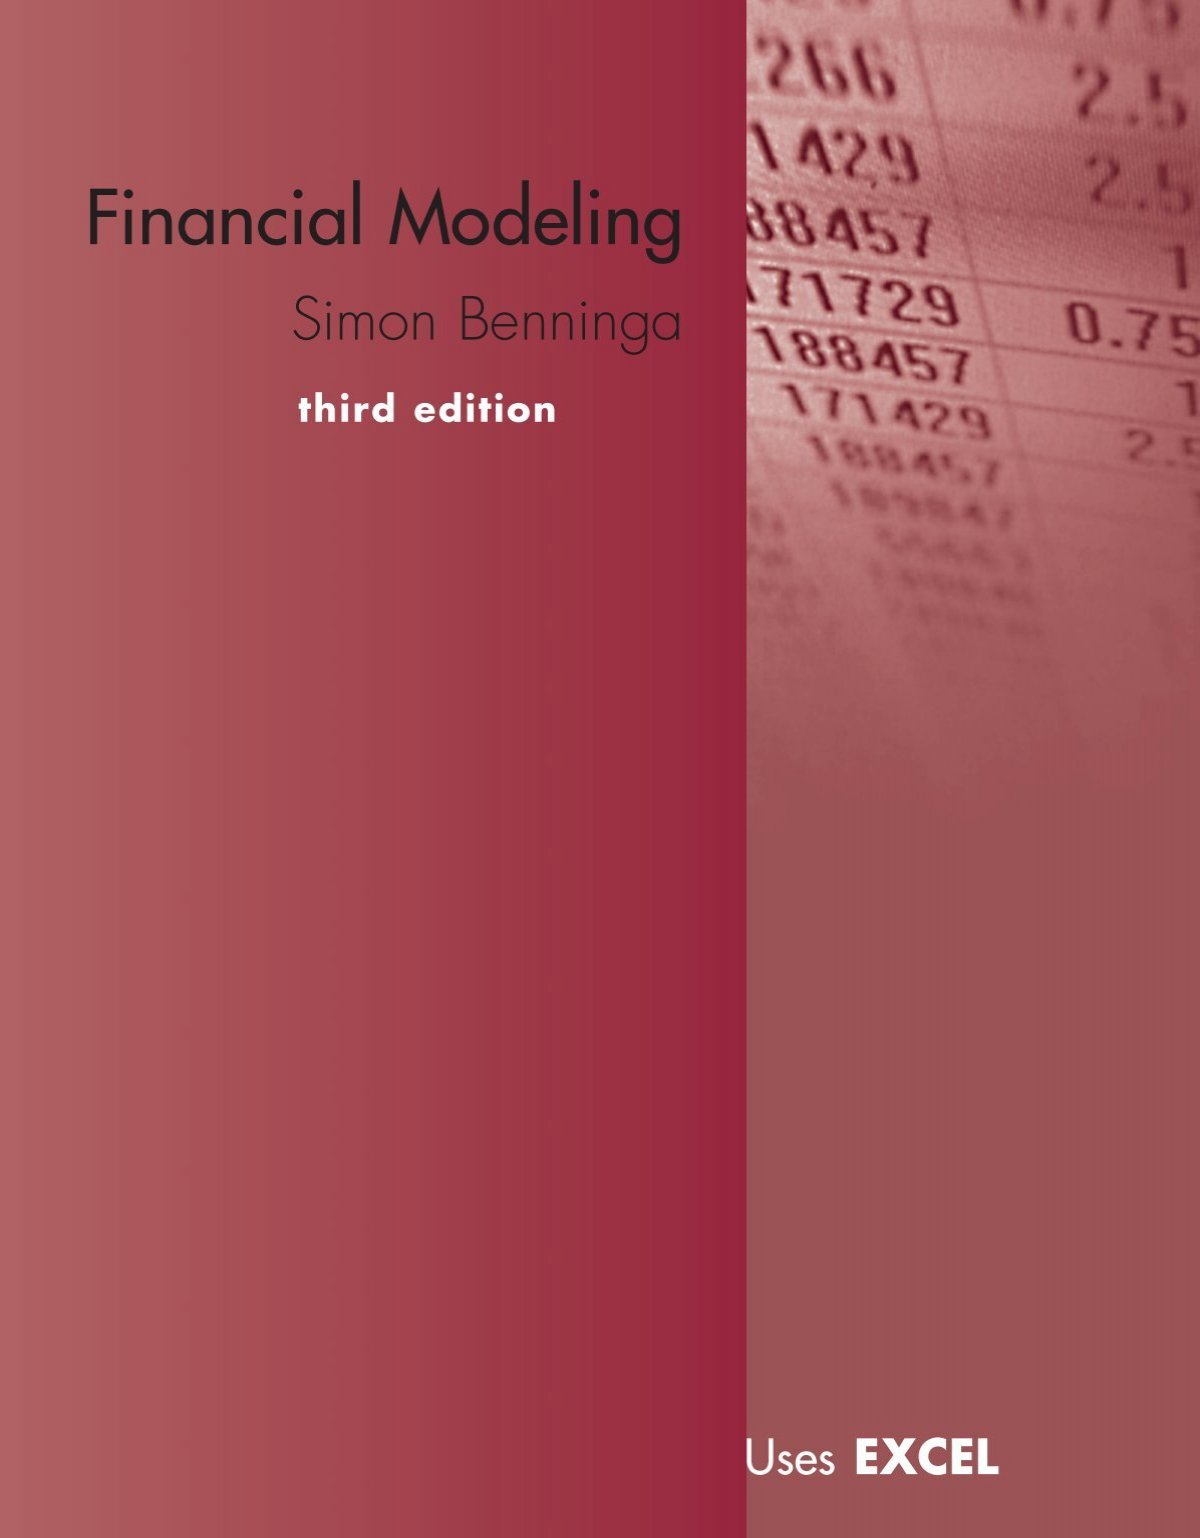 Financial Modeling Uses Excel 3rd Ed